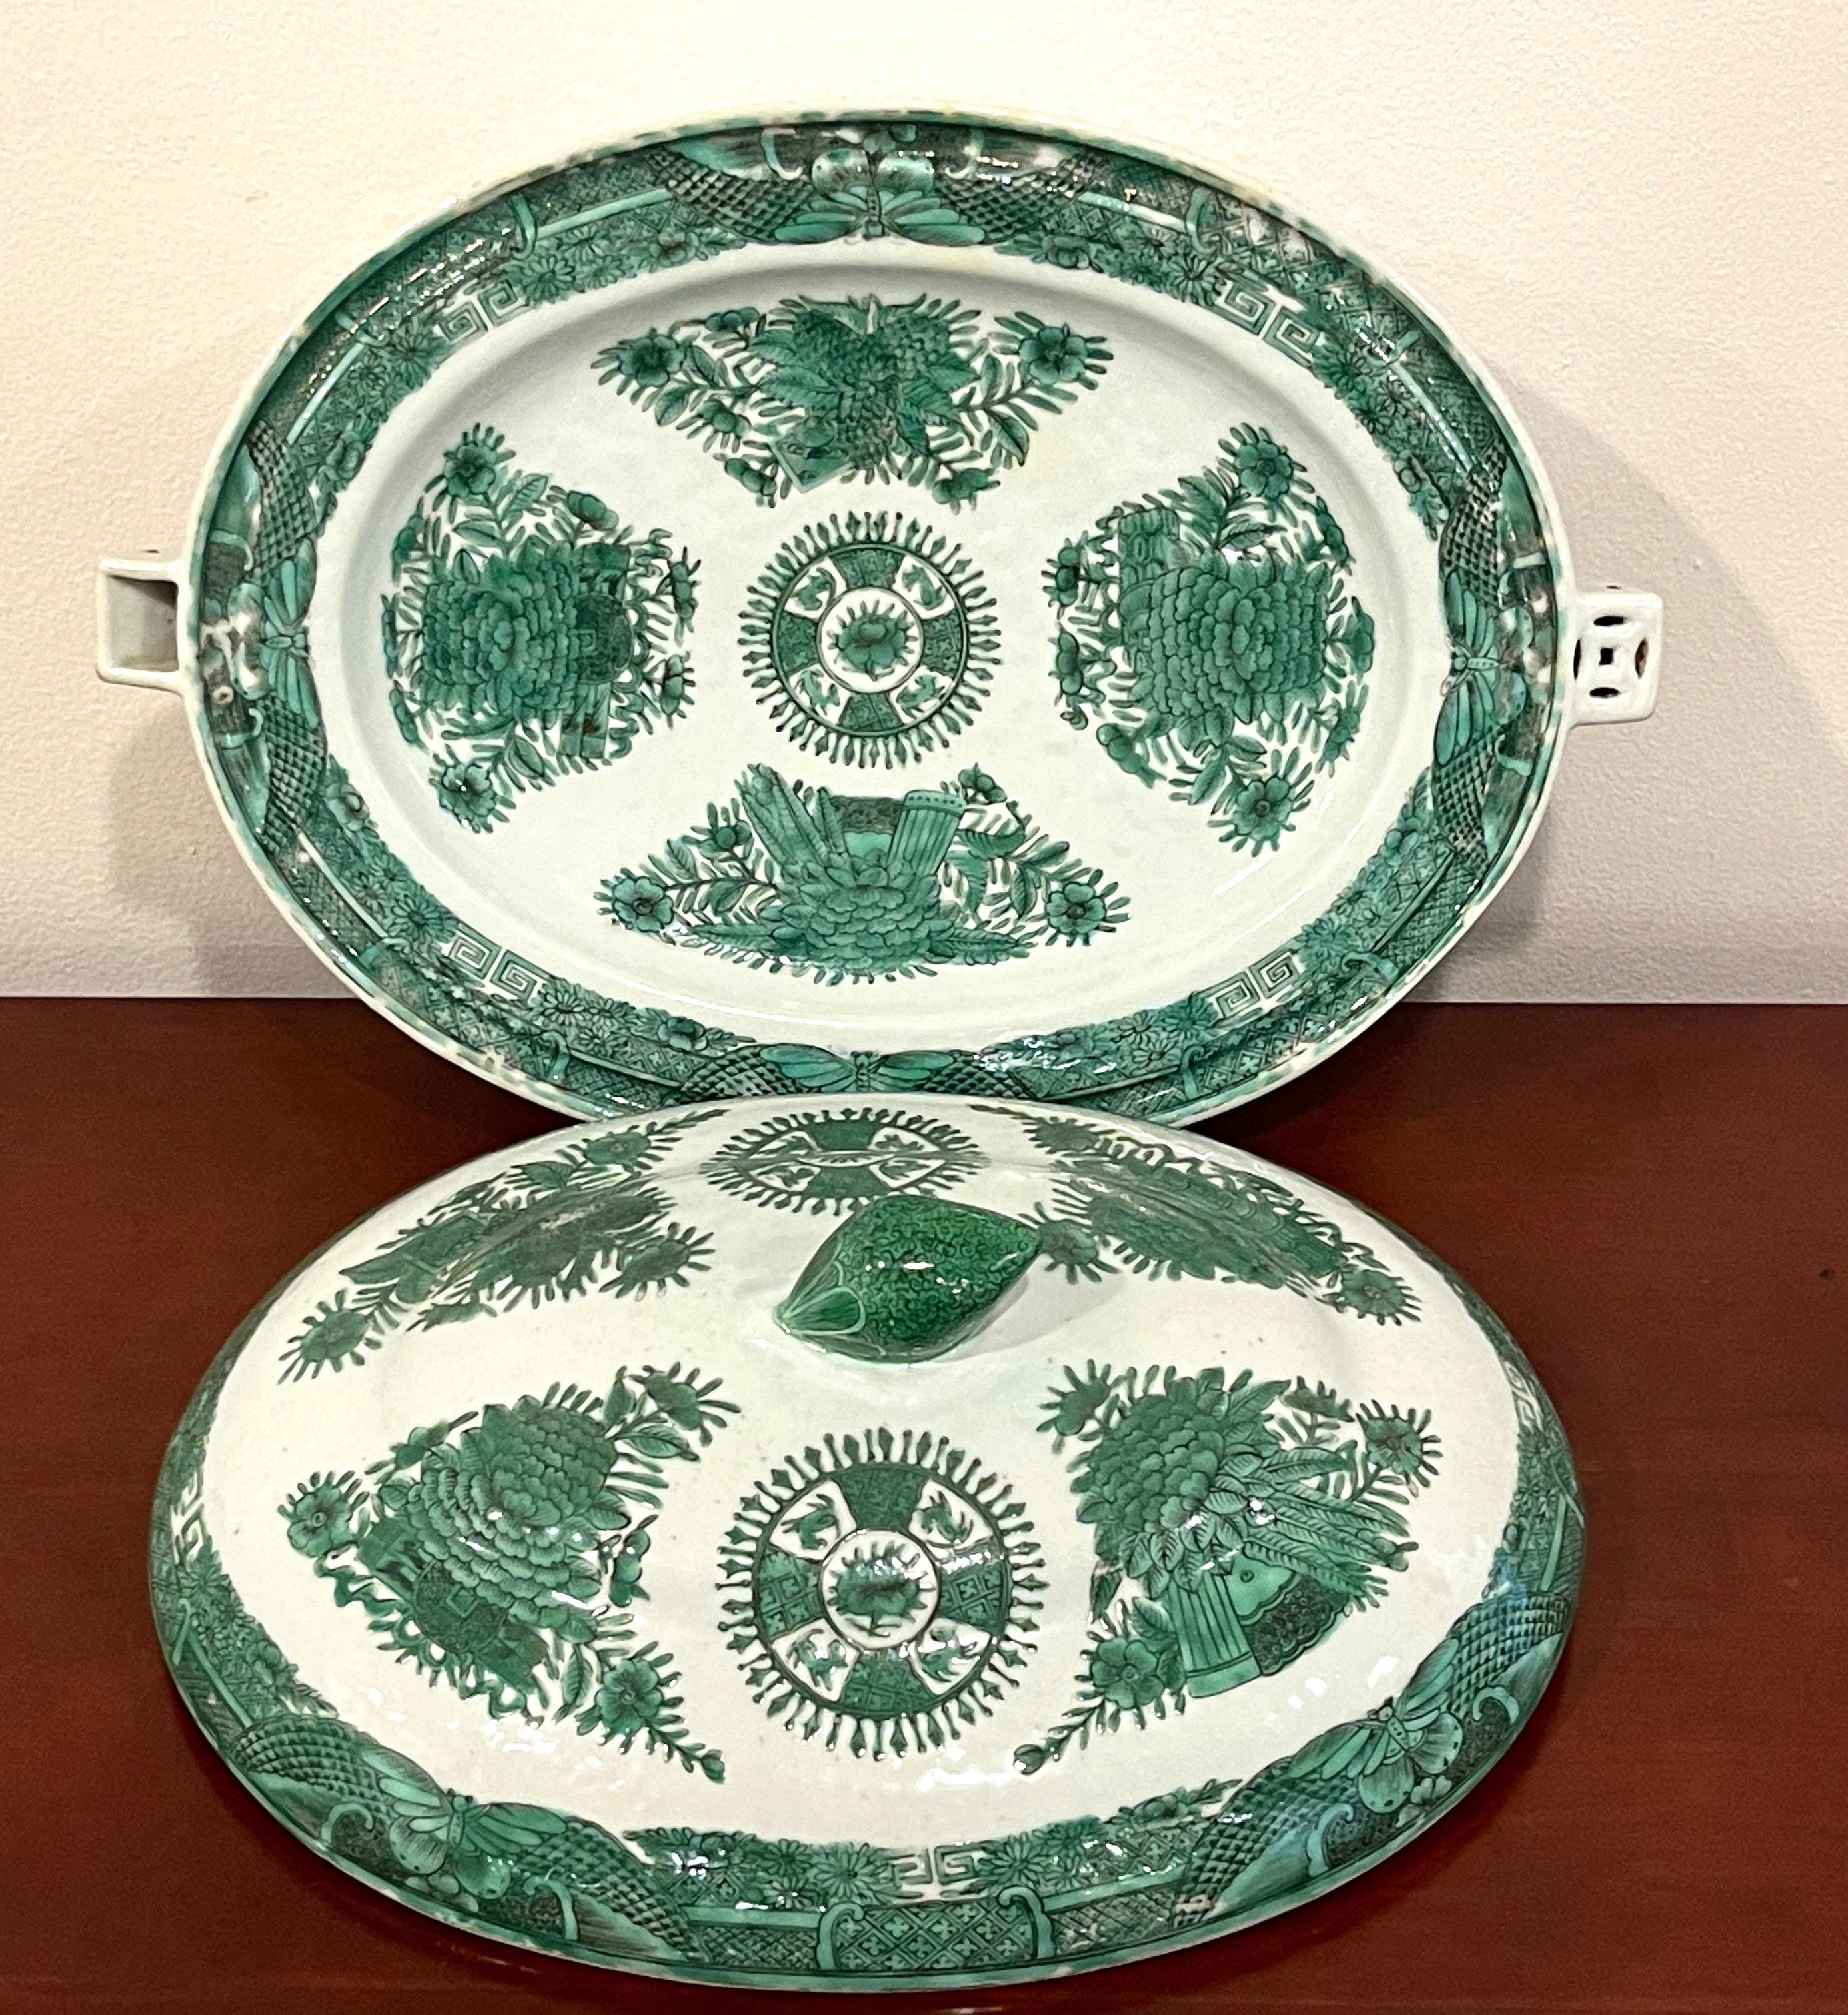 19th Century Chinese Export Green 'Fitzhugh' Hot Water Platter- Tureen *
China, Circa 1850

* Reference
Chinese Export Porcelain, Standard patterns and forms 1780-1880
Herbert & Nancy Schiffer 
see Page 141, Image #382 & 383 for similar documented